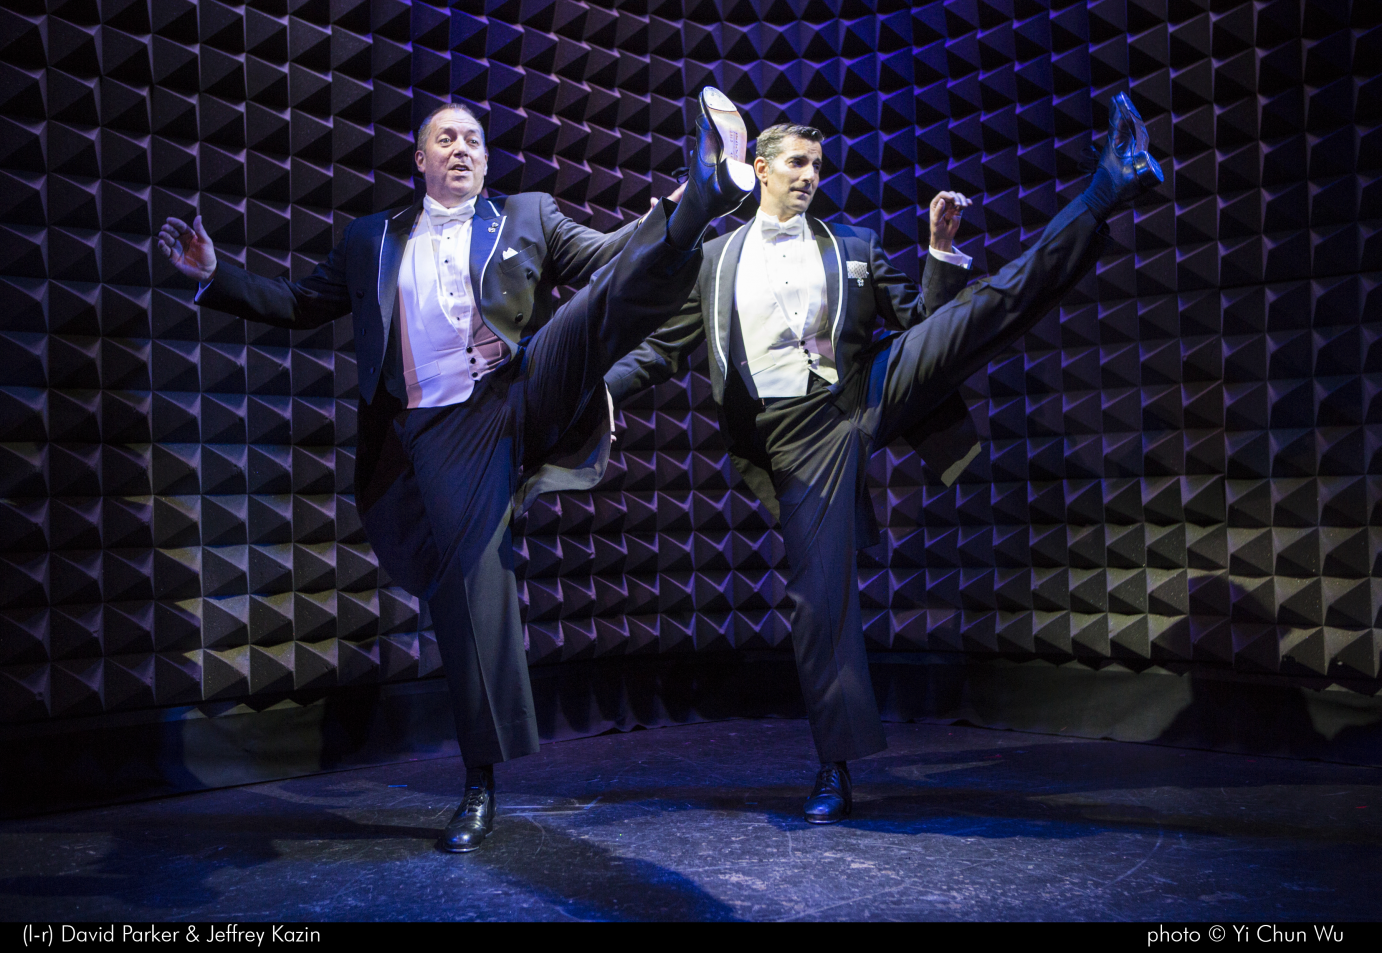 David Parker and Jeffrey Kazin wear tuxedos. Standing side by side, they kick one leg up to the audience. 